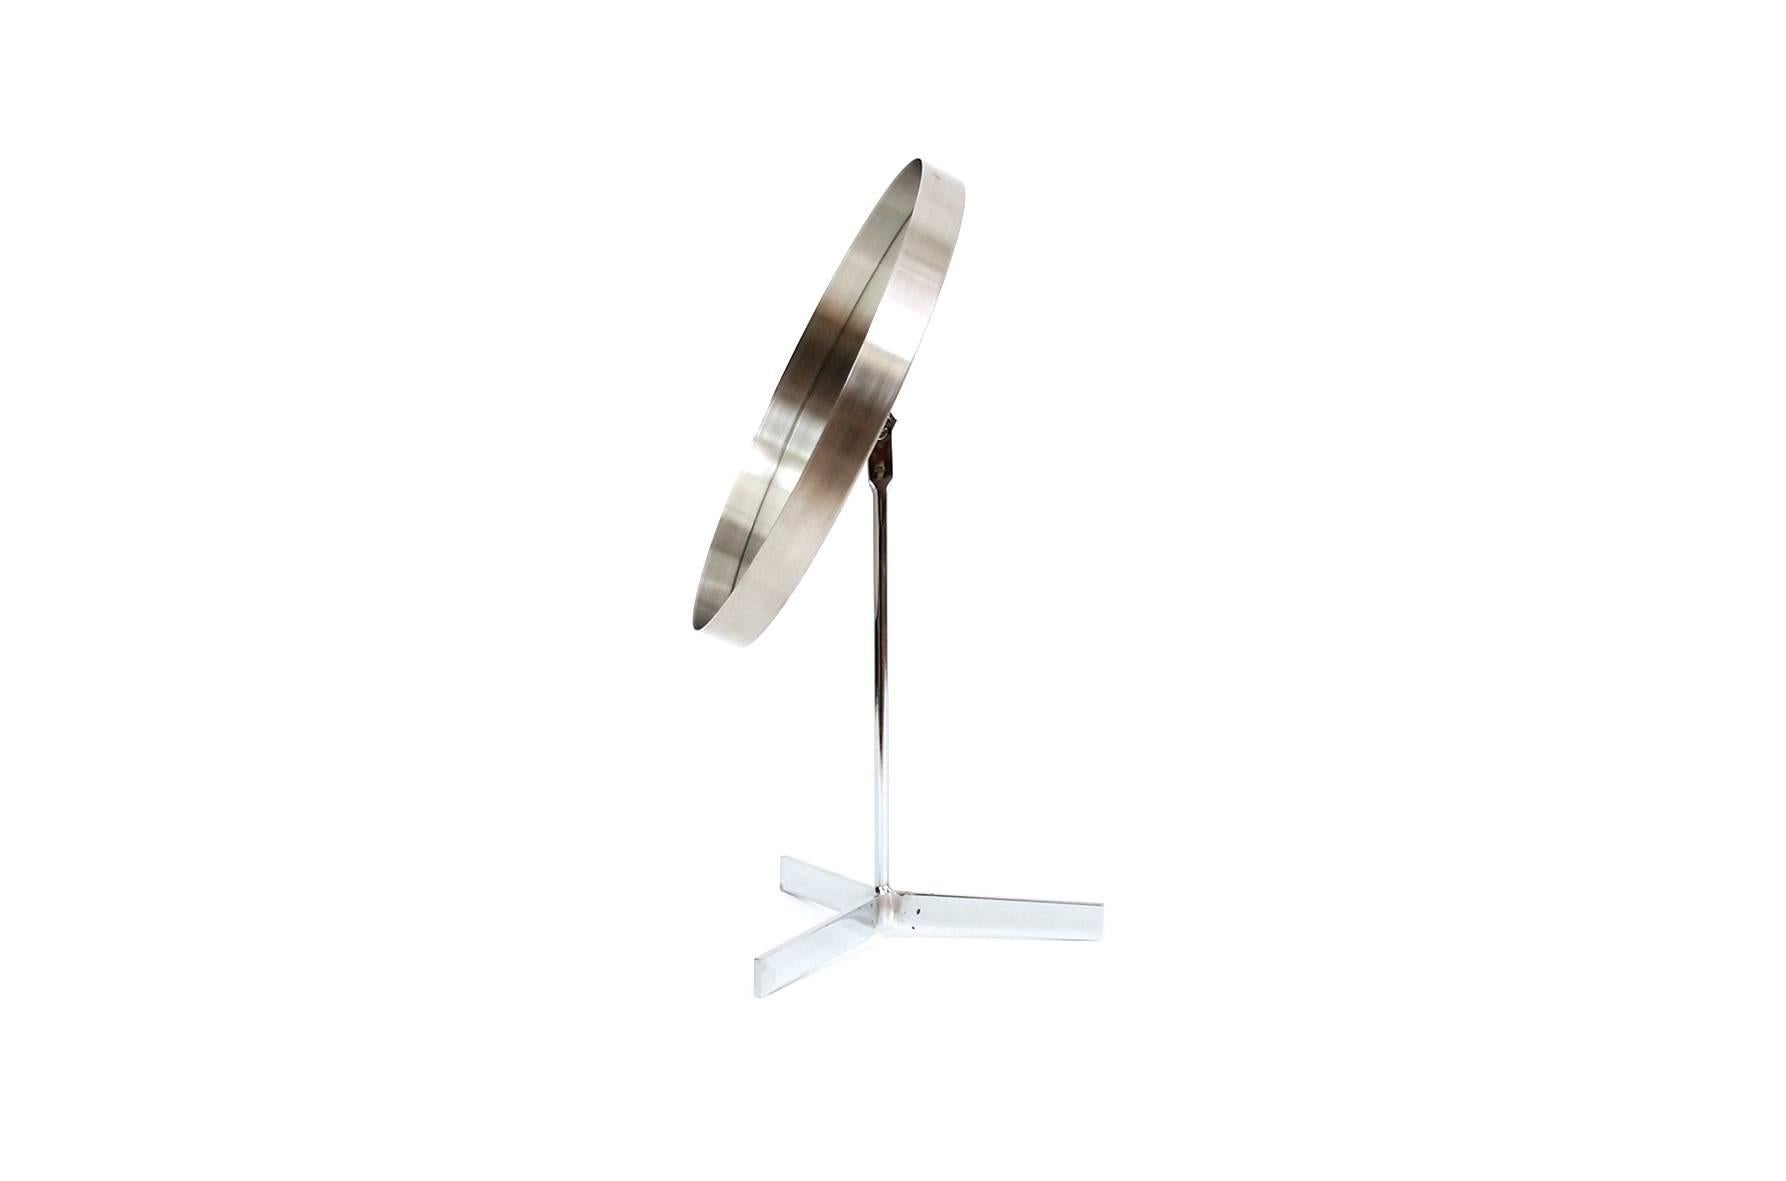 Table or vanity mirror in the style of the Swedish company Luxus. This particular example in chromed steel. Produced by Durlston in the 1960s. Attractive cantilevered design and useful form.